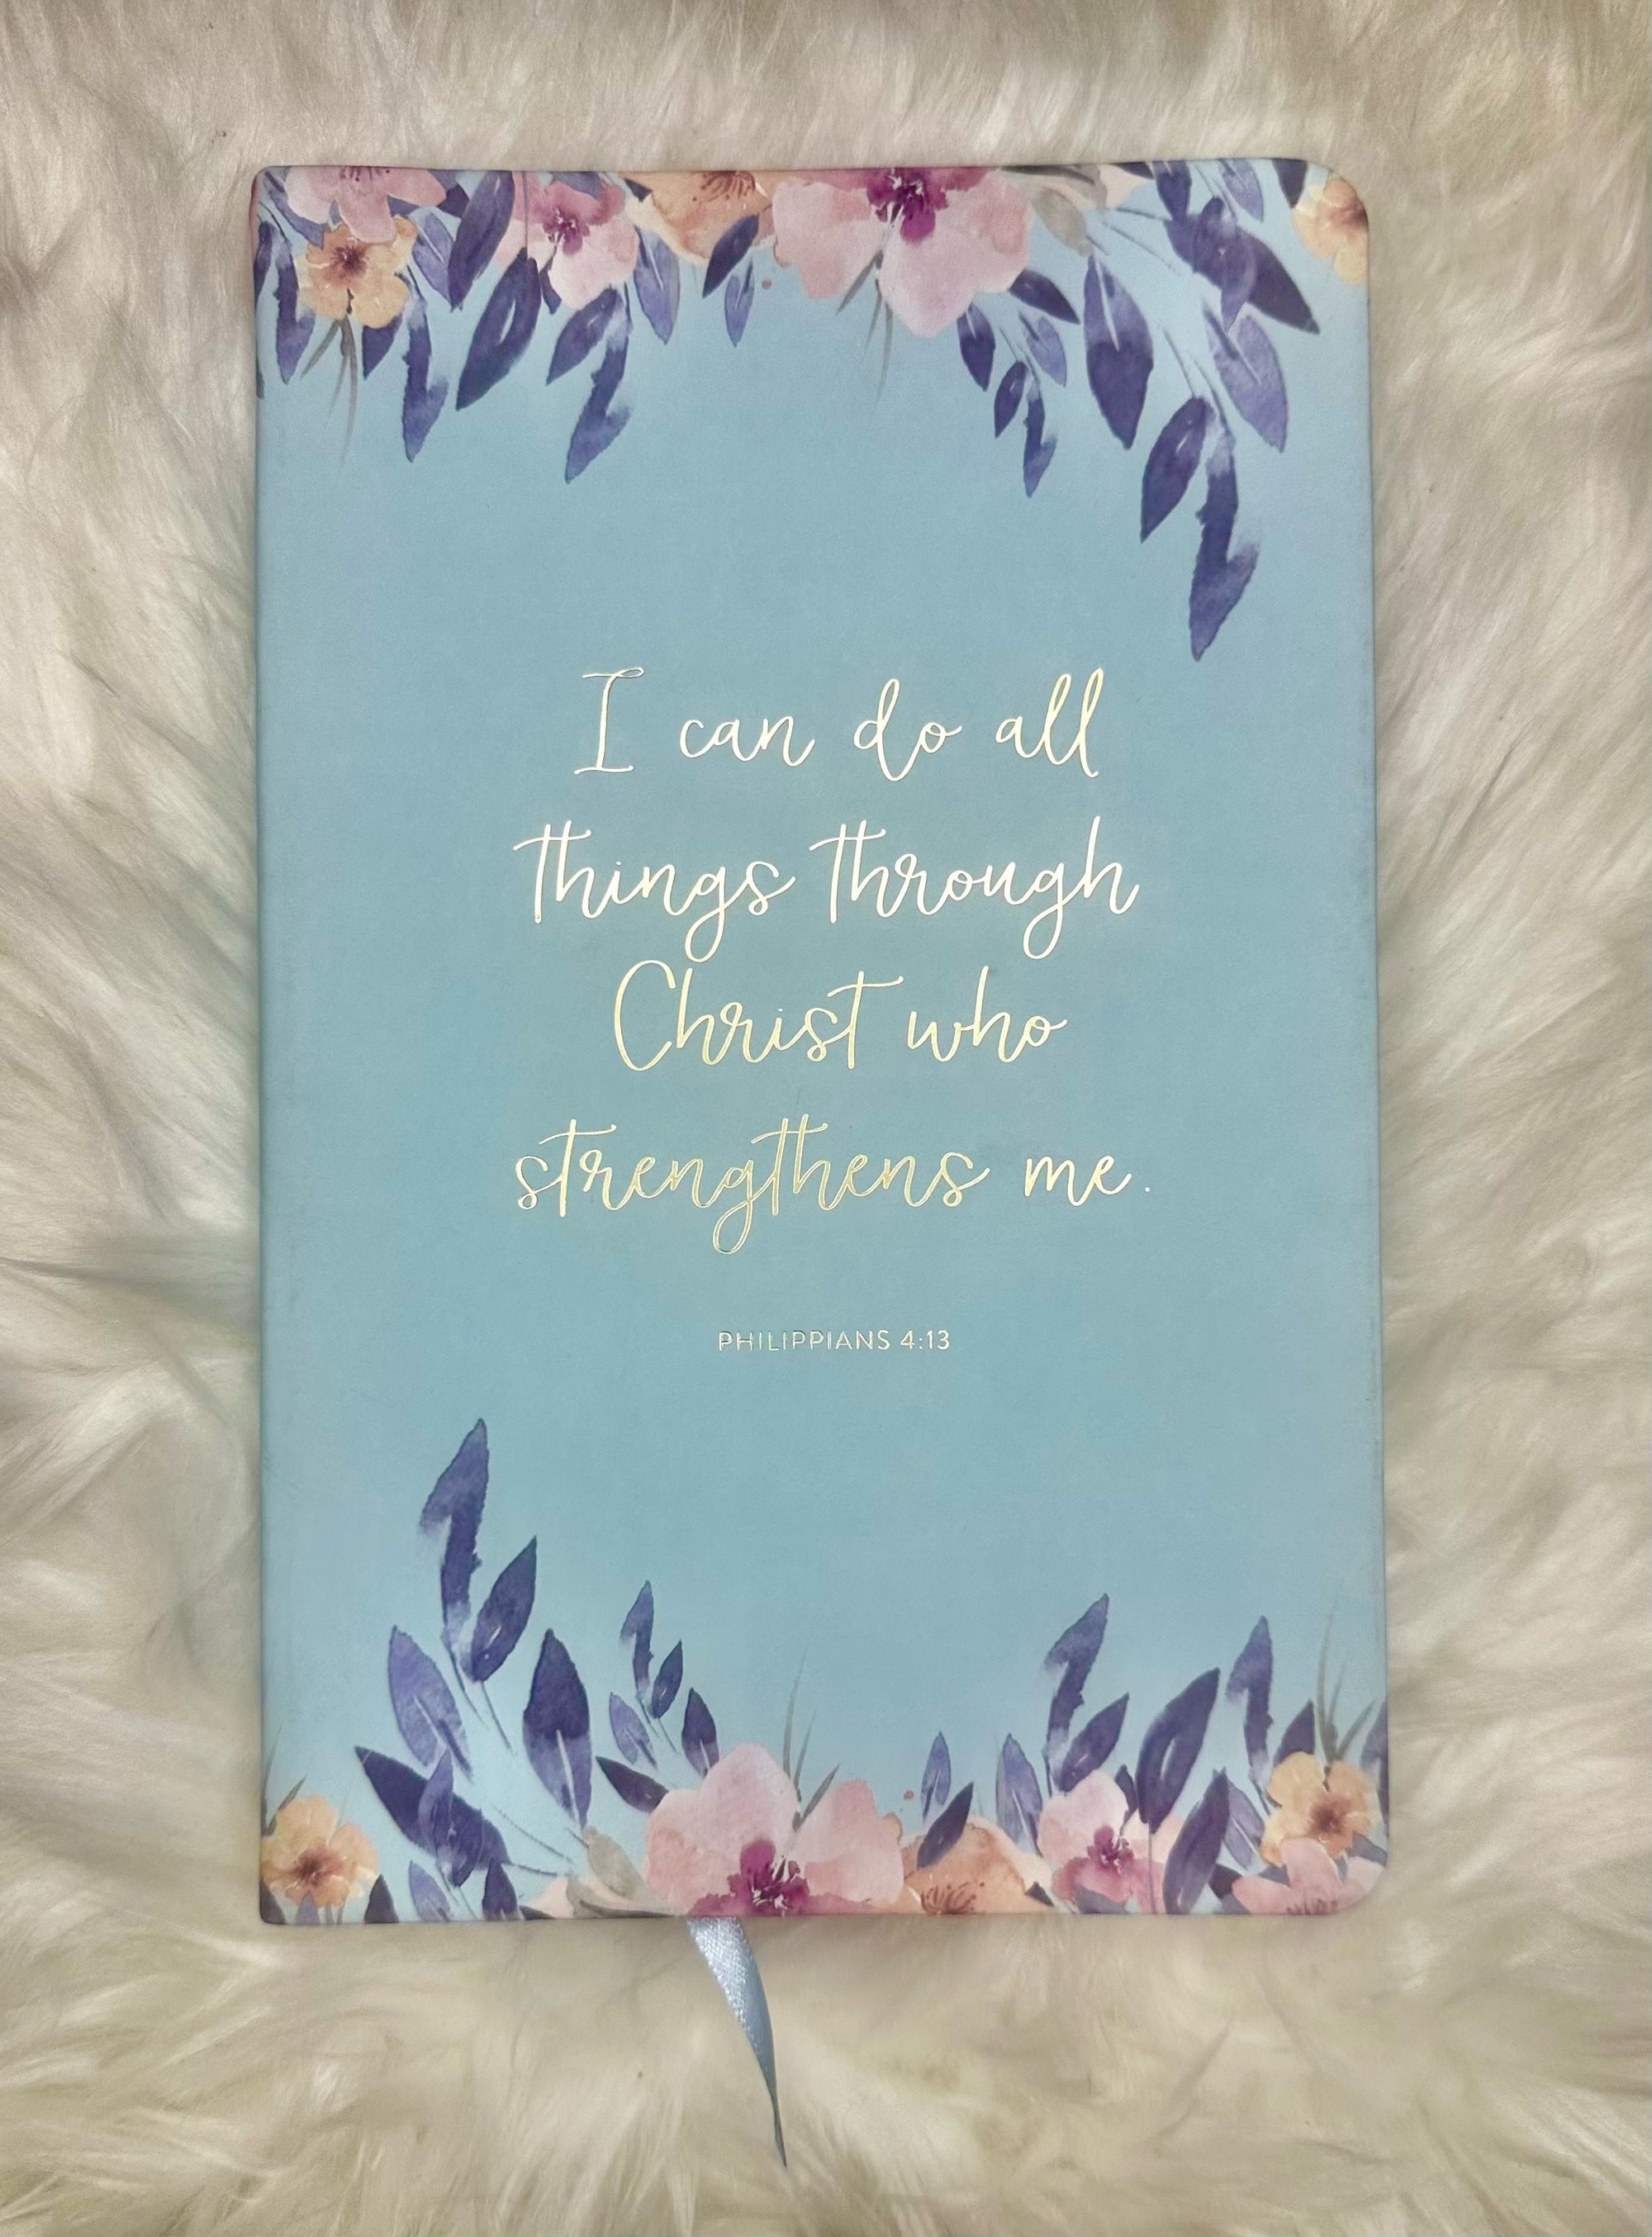 I CAN DO ALL THINGS THROUGH CHRIST JOURNAL BOOK